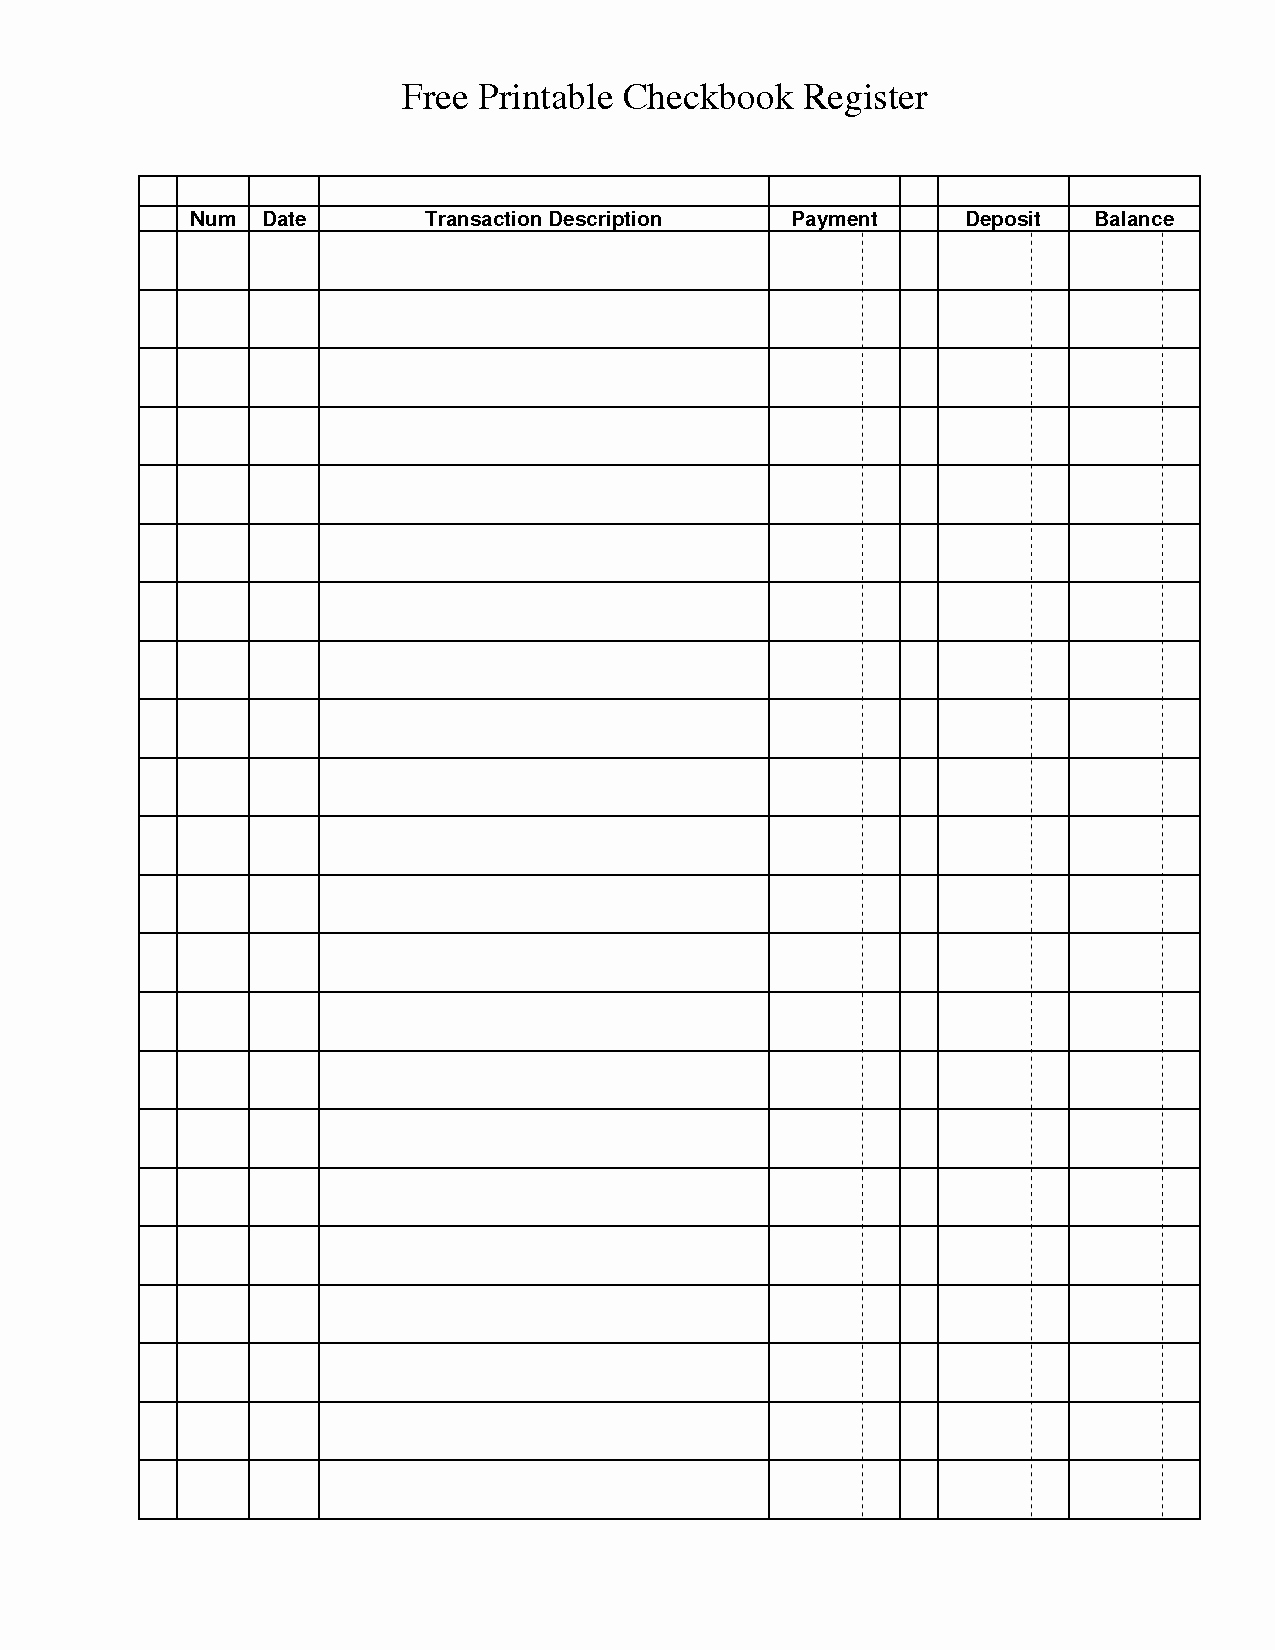 010 Trucking Spreadsheets Free New General Ledger Template Printable - Free Printable Ledger Sheets